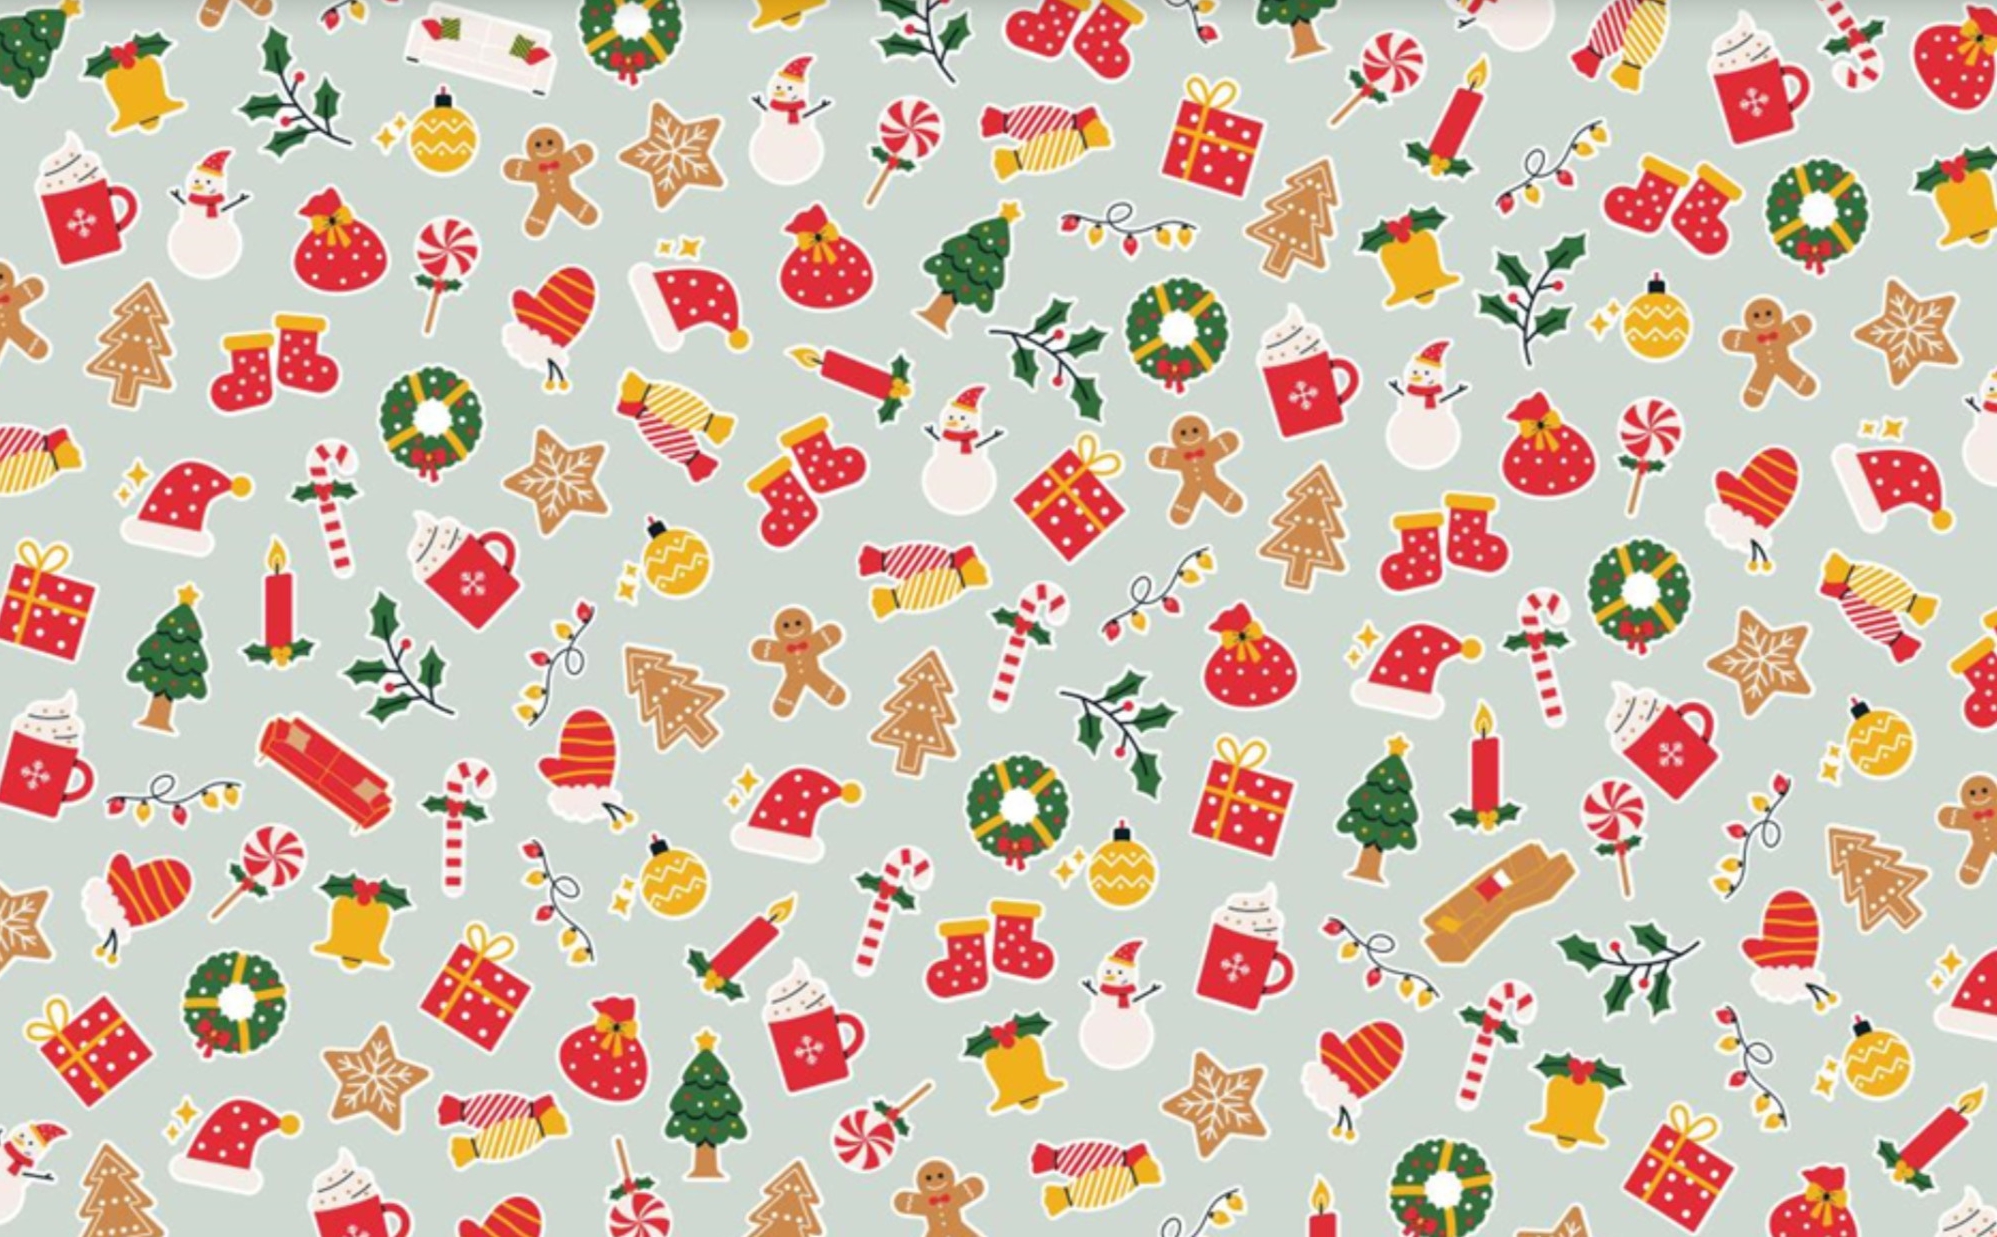 Everyone can see the Christmas wrapping paper – but you may be in the top 1% if you can spot 3 sofas in under 10 seconds